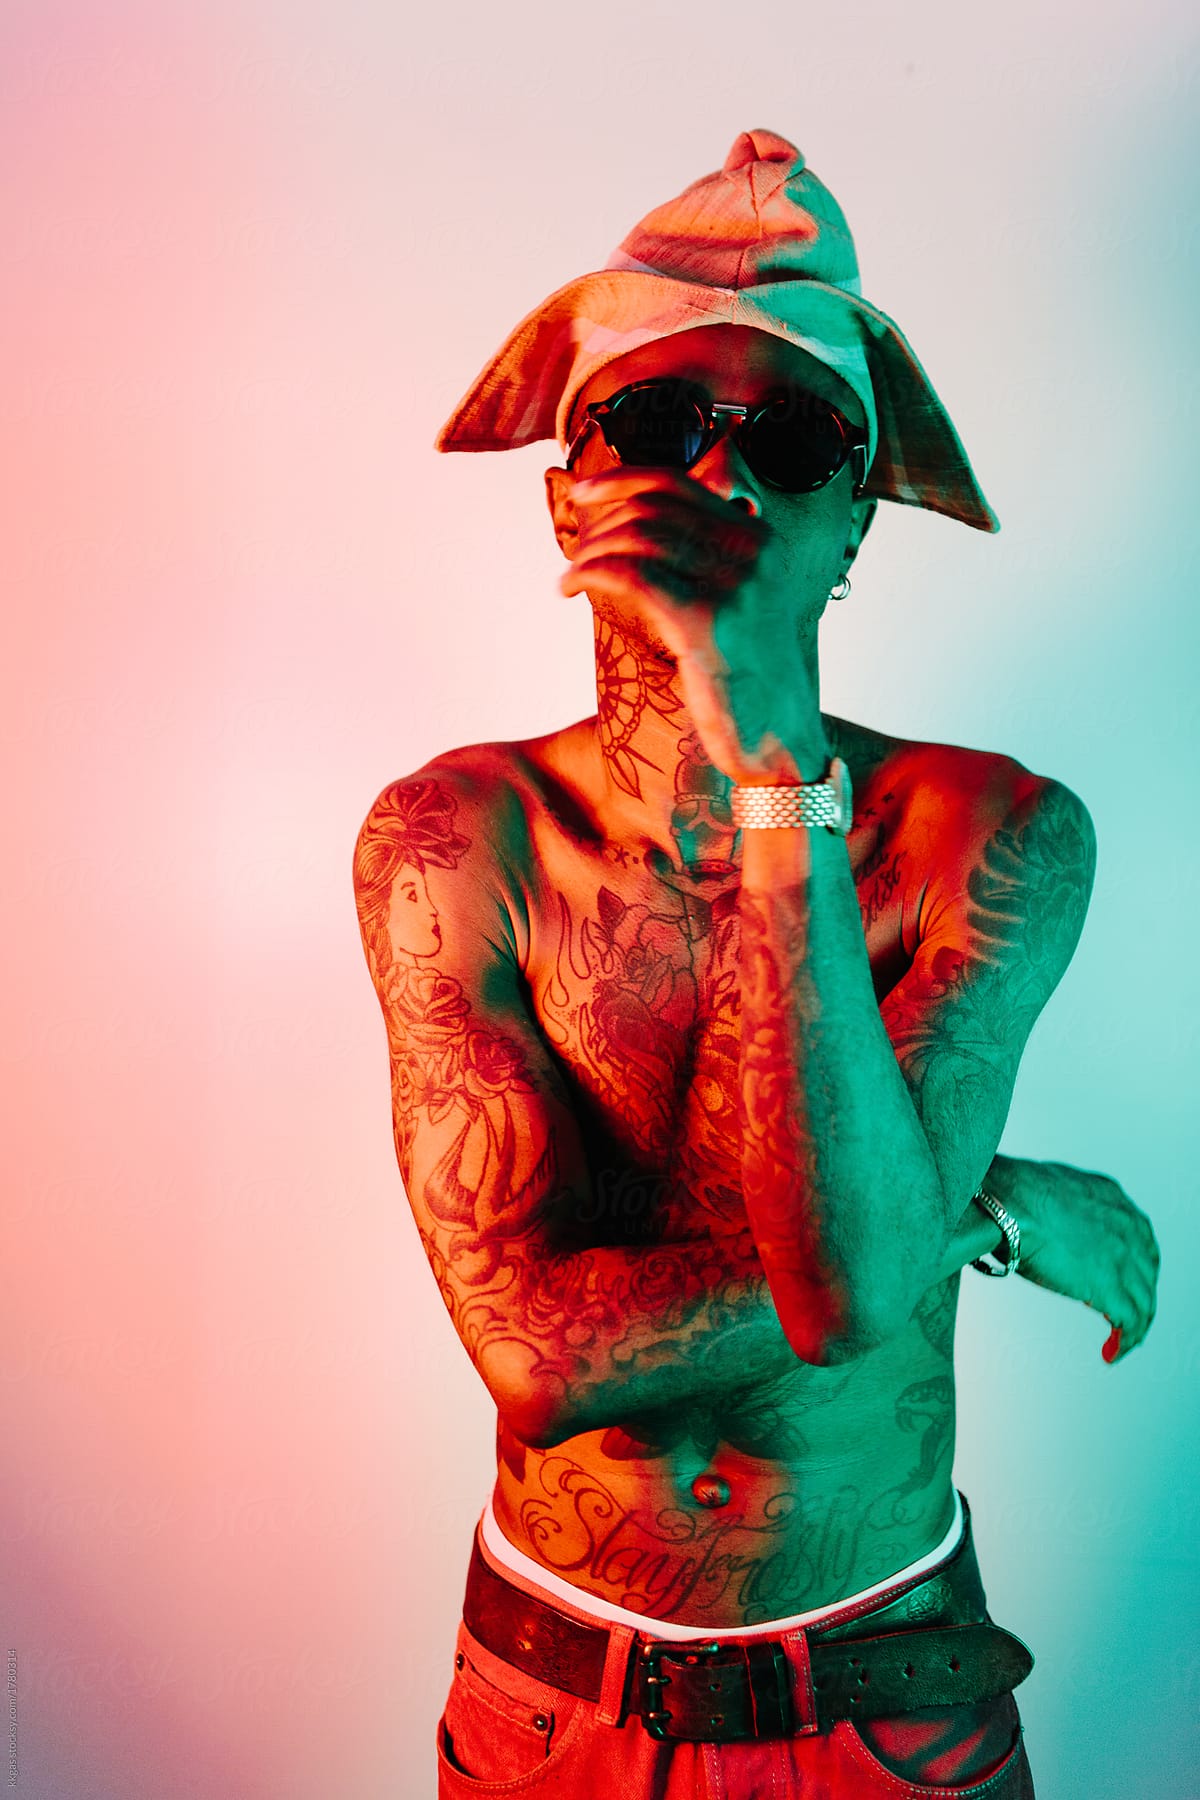 Bare chested heavily tattooed man wearing a Yoruba hat with orange and green lighting